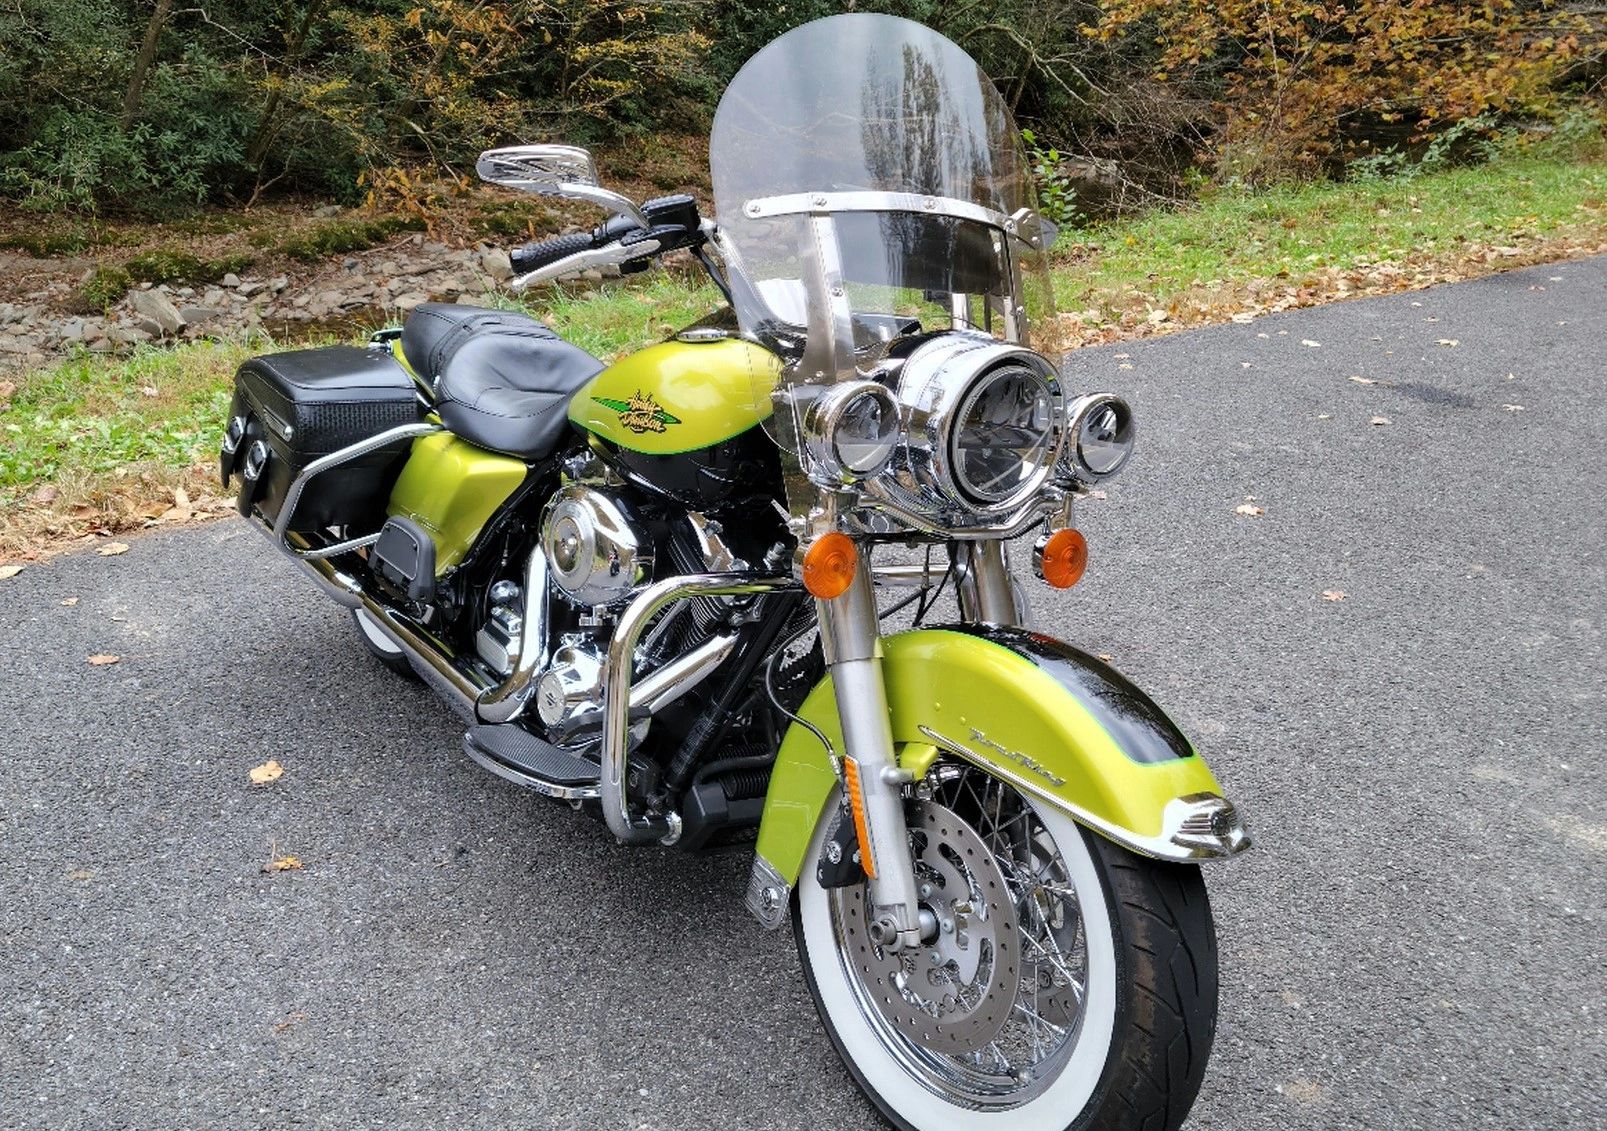 Motorcycle for rent Pigeon Forge TN. Harley Street Glide for rent, Motorcycle rent Maryville TN